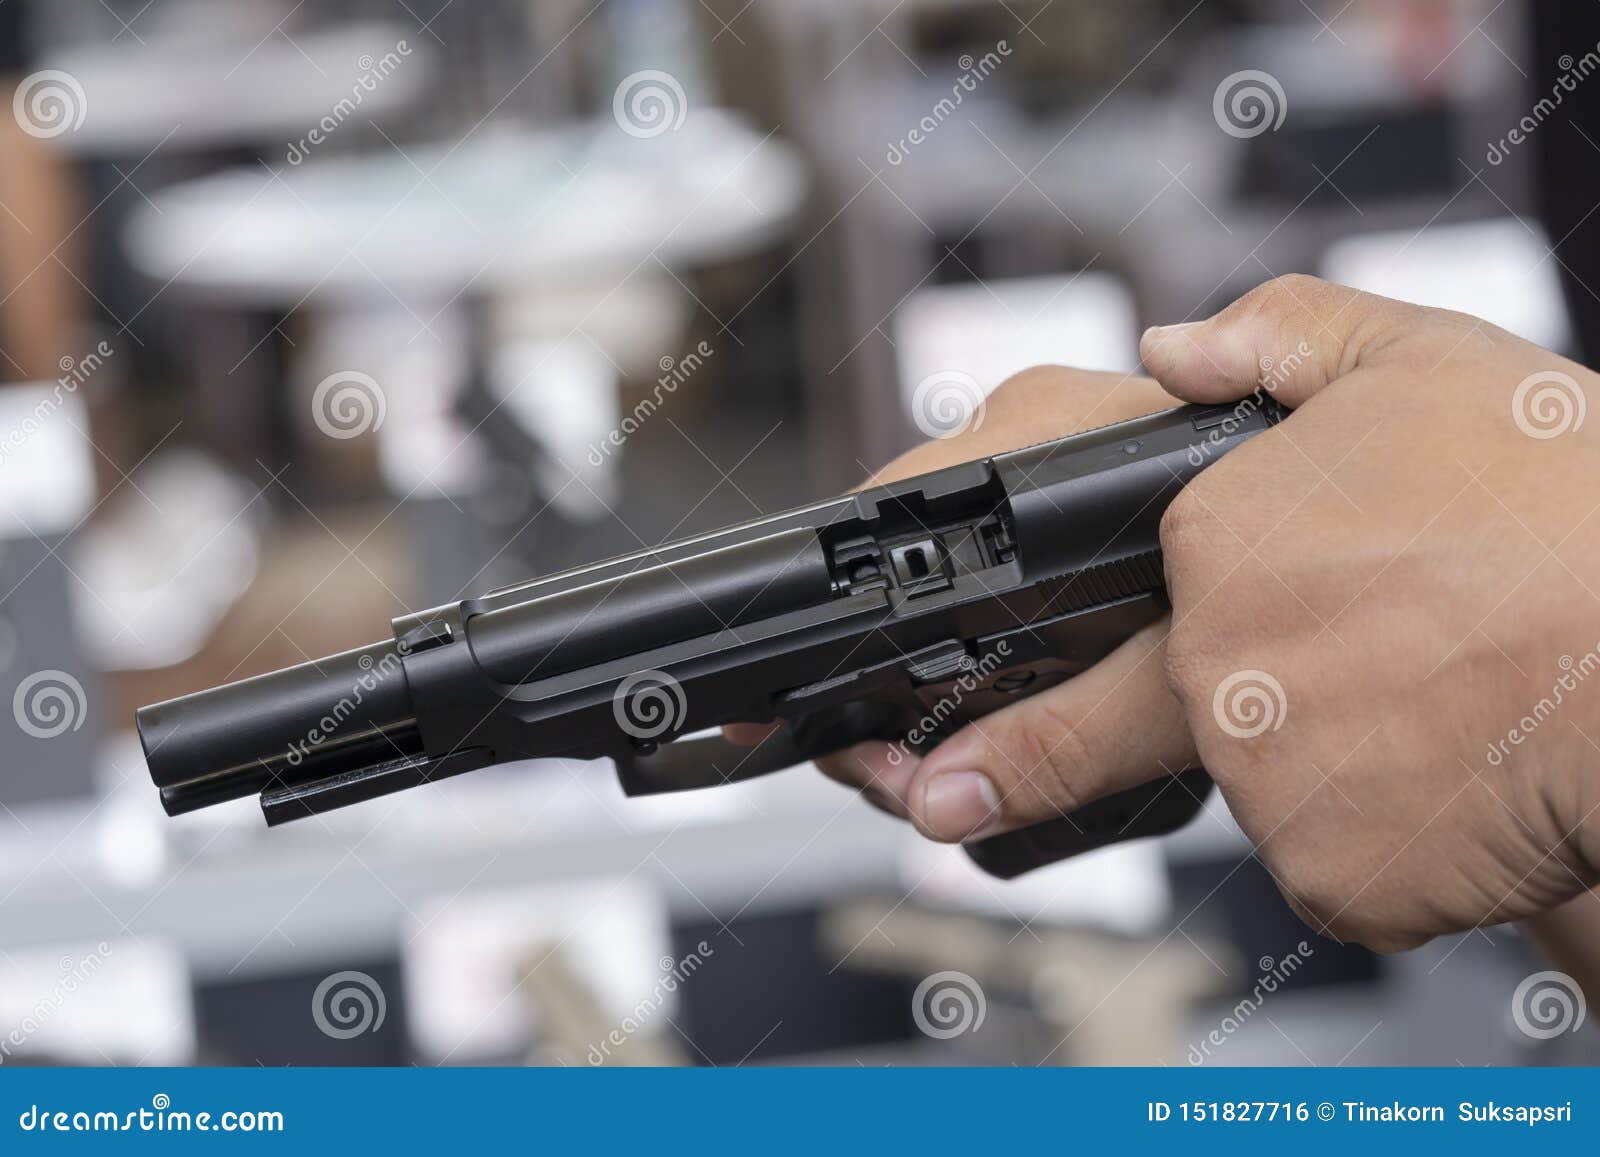 Firearms And Security Topic: Hand Man With A Gun Ready To 